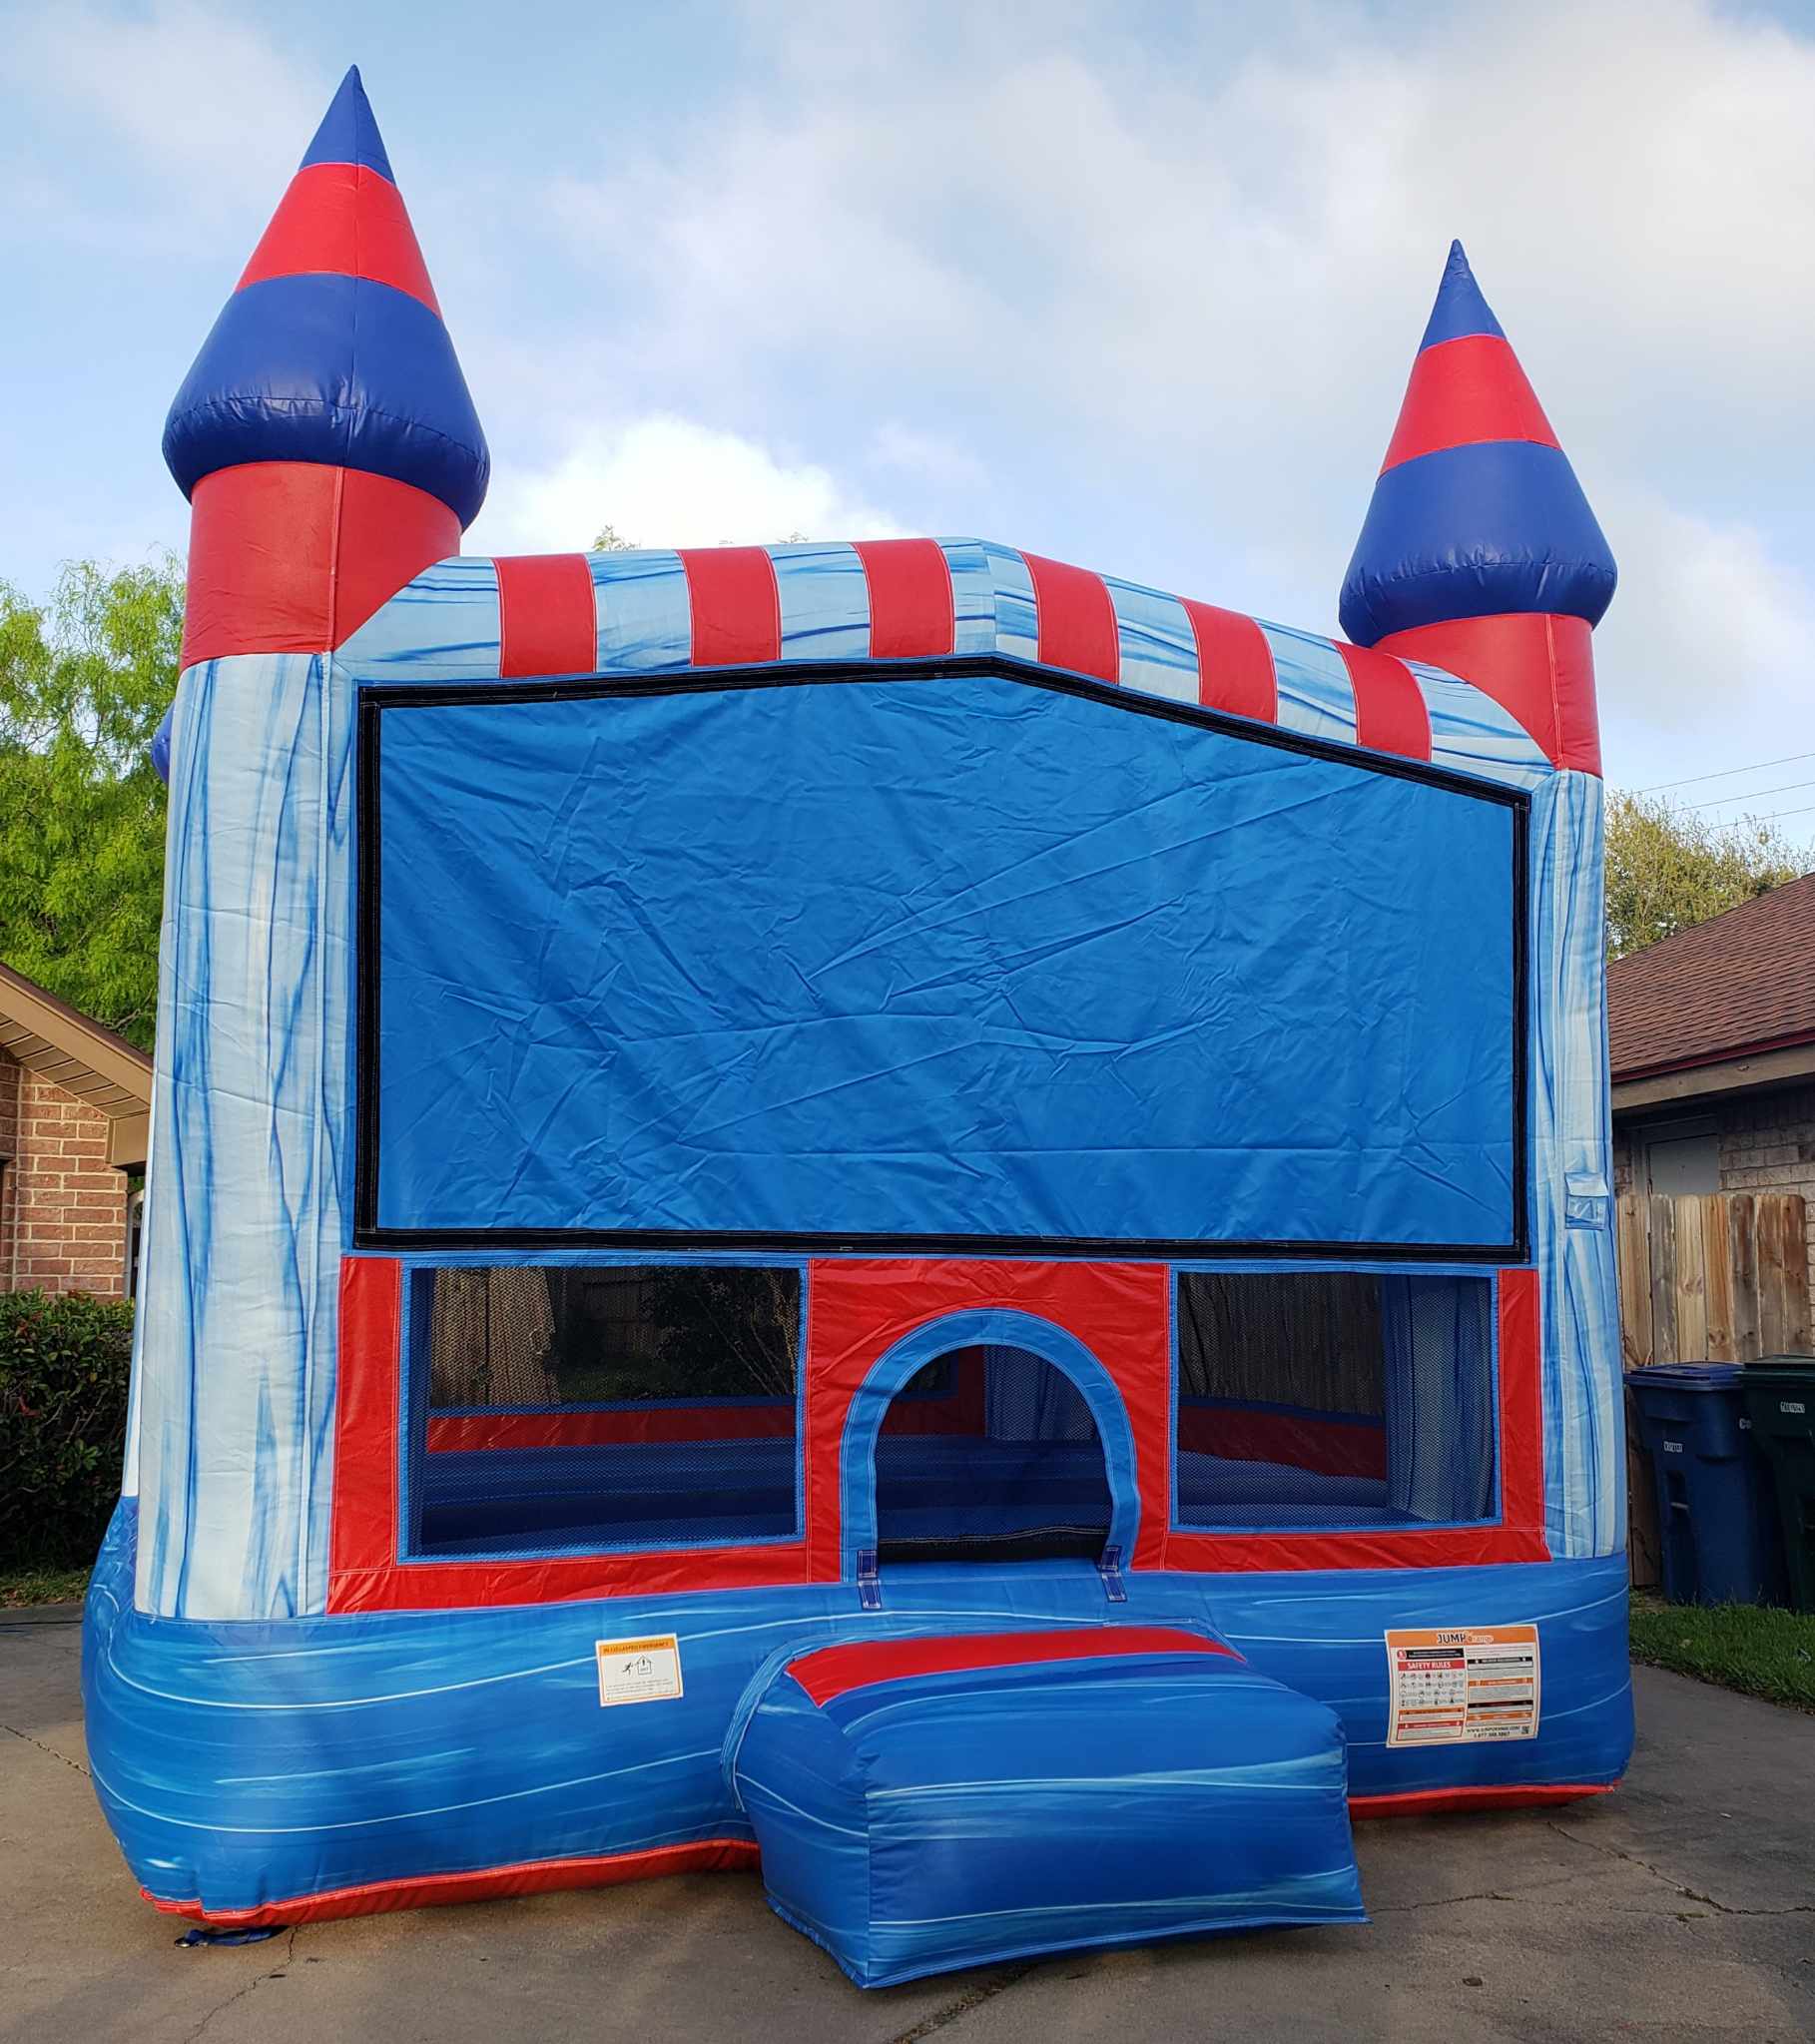 TNT Party Kings - bounce house rentals and slides for parties in Corpus  Christi